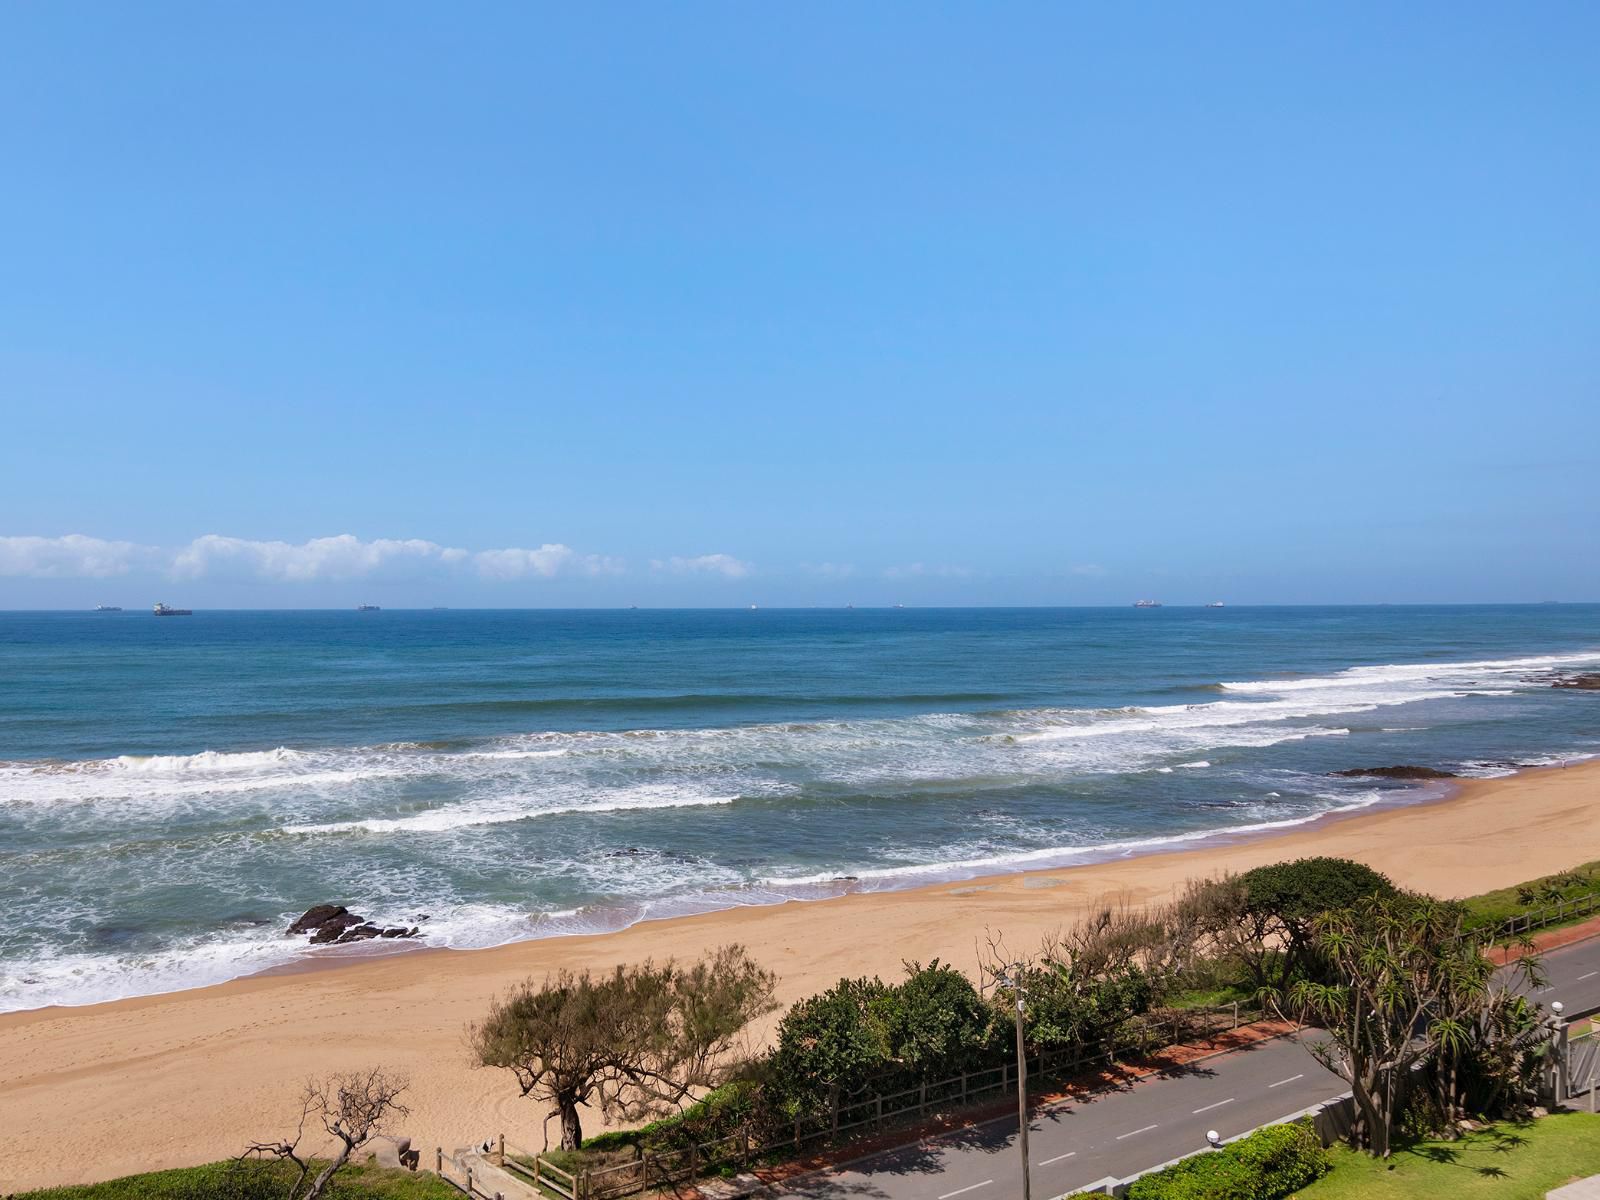 Escape To A Coastal Oasis Selection Beach Durban Kwazulu Natal South Africa Beach, Nature, Sand, Wave, Waters, Ocean